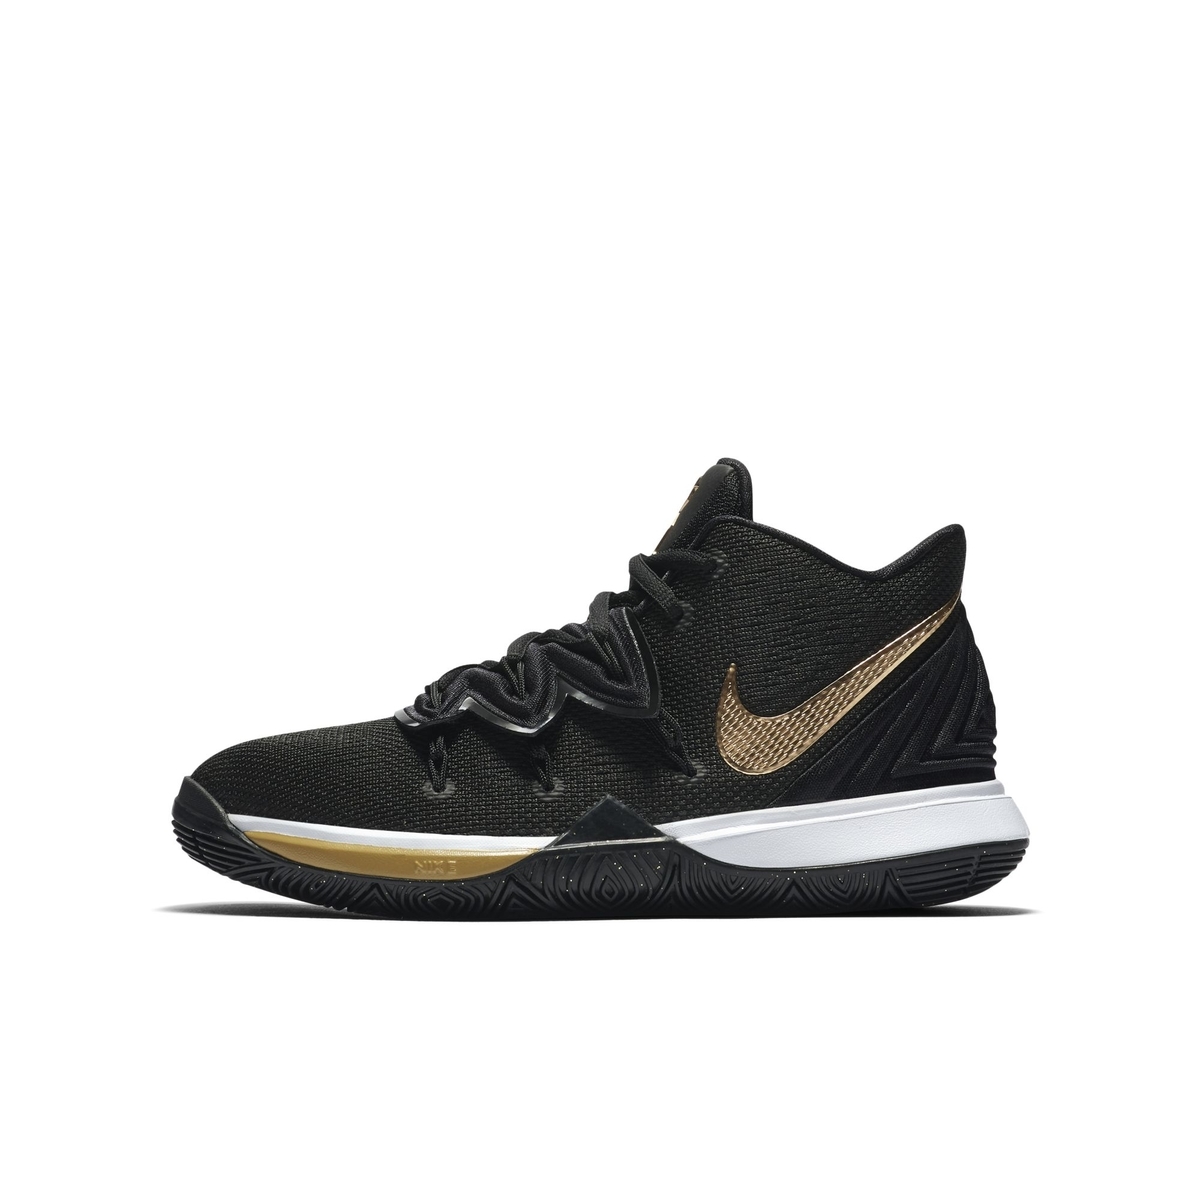 kyrie 5 gold and black